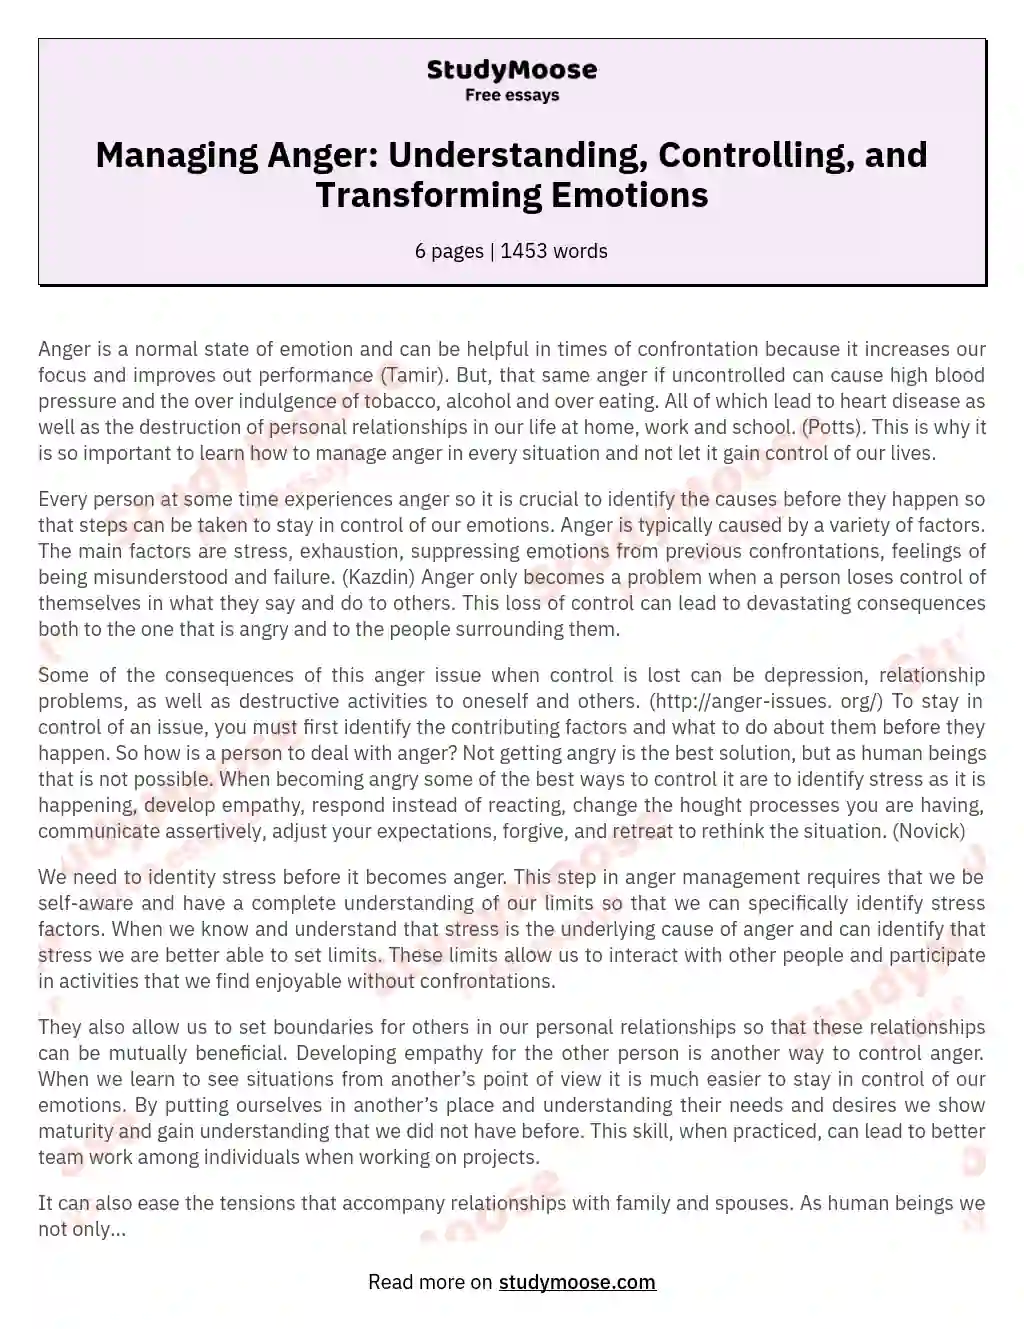 Managing Anger: Understanding, Controlling, and Transforming Emotions essay